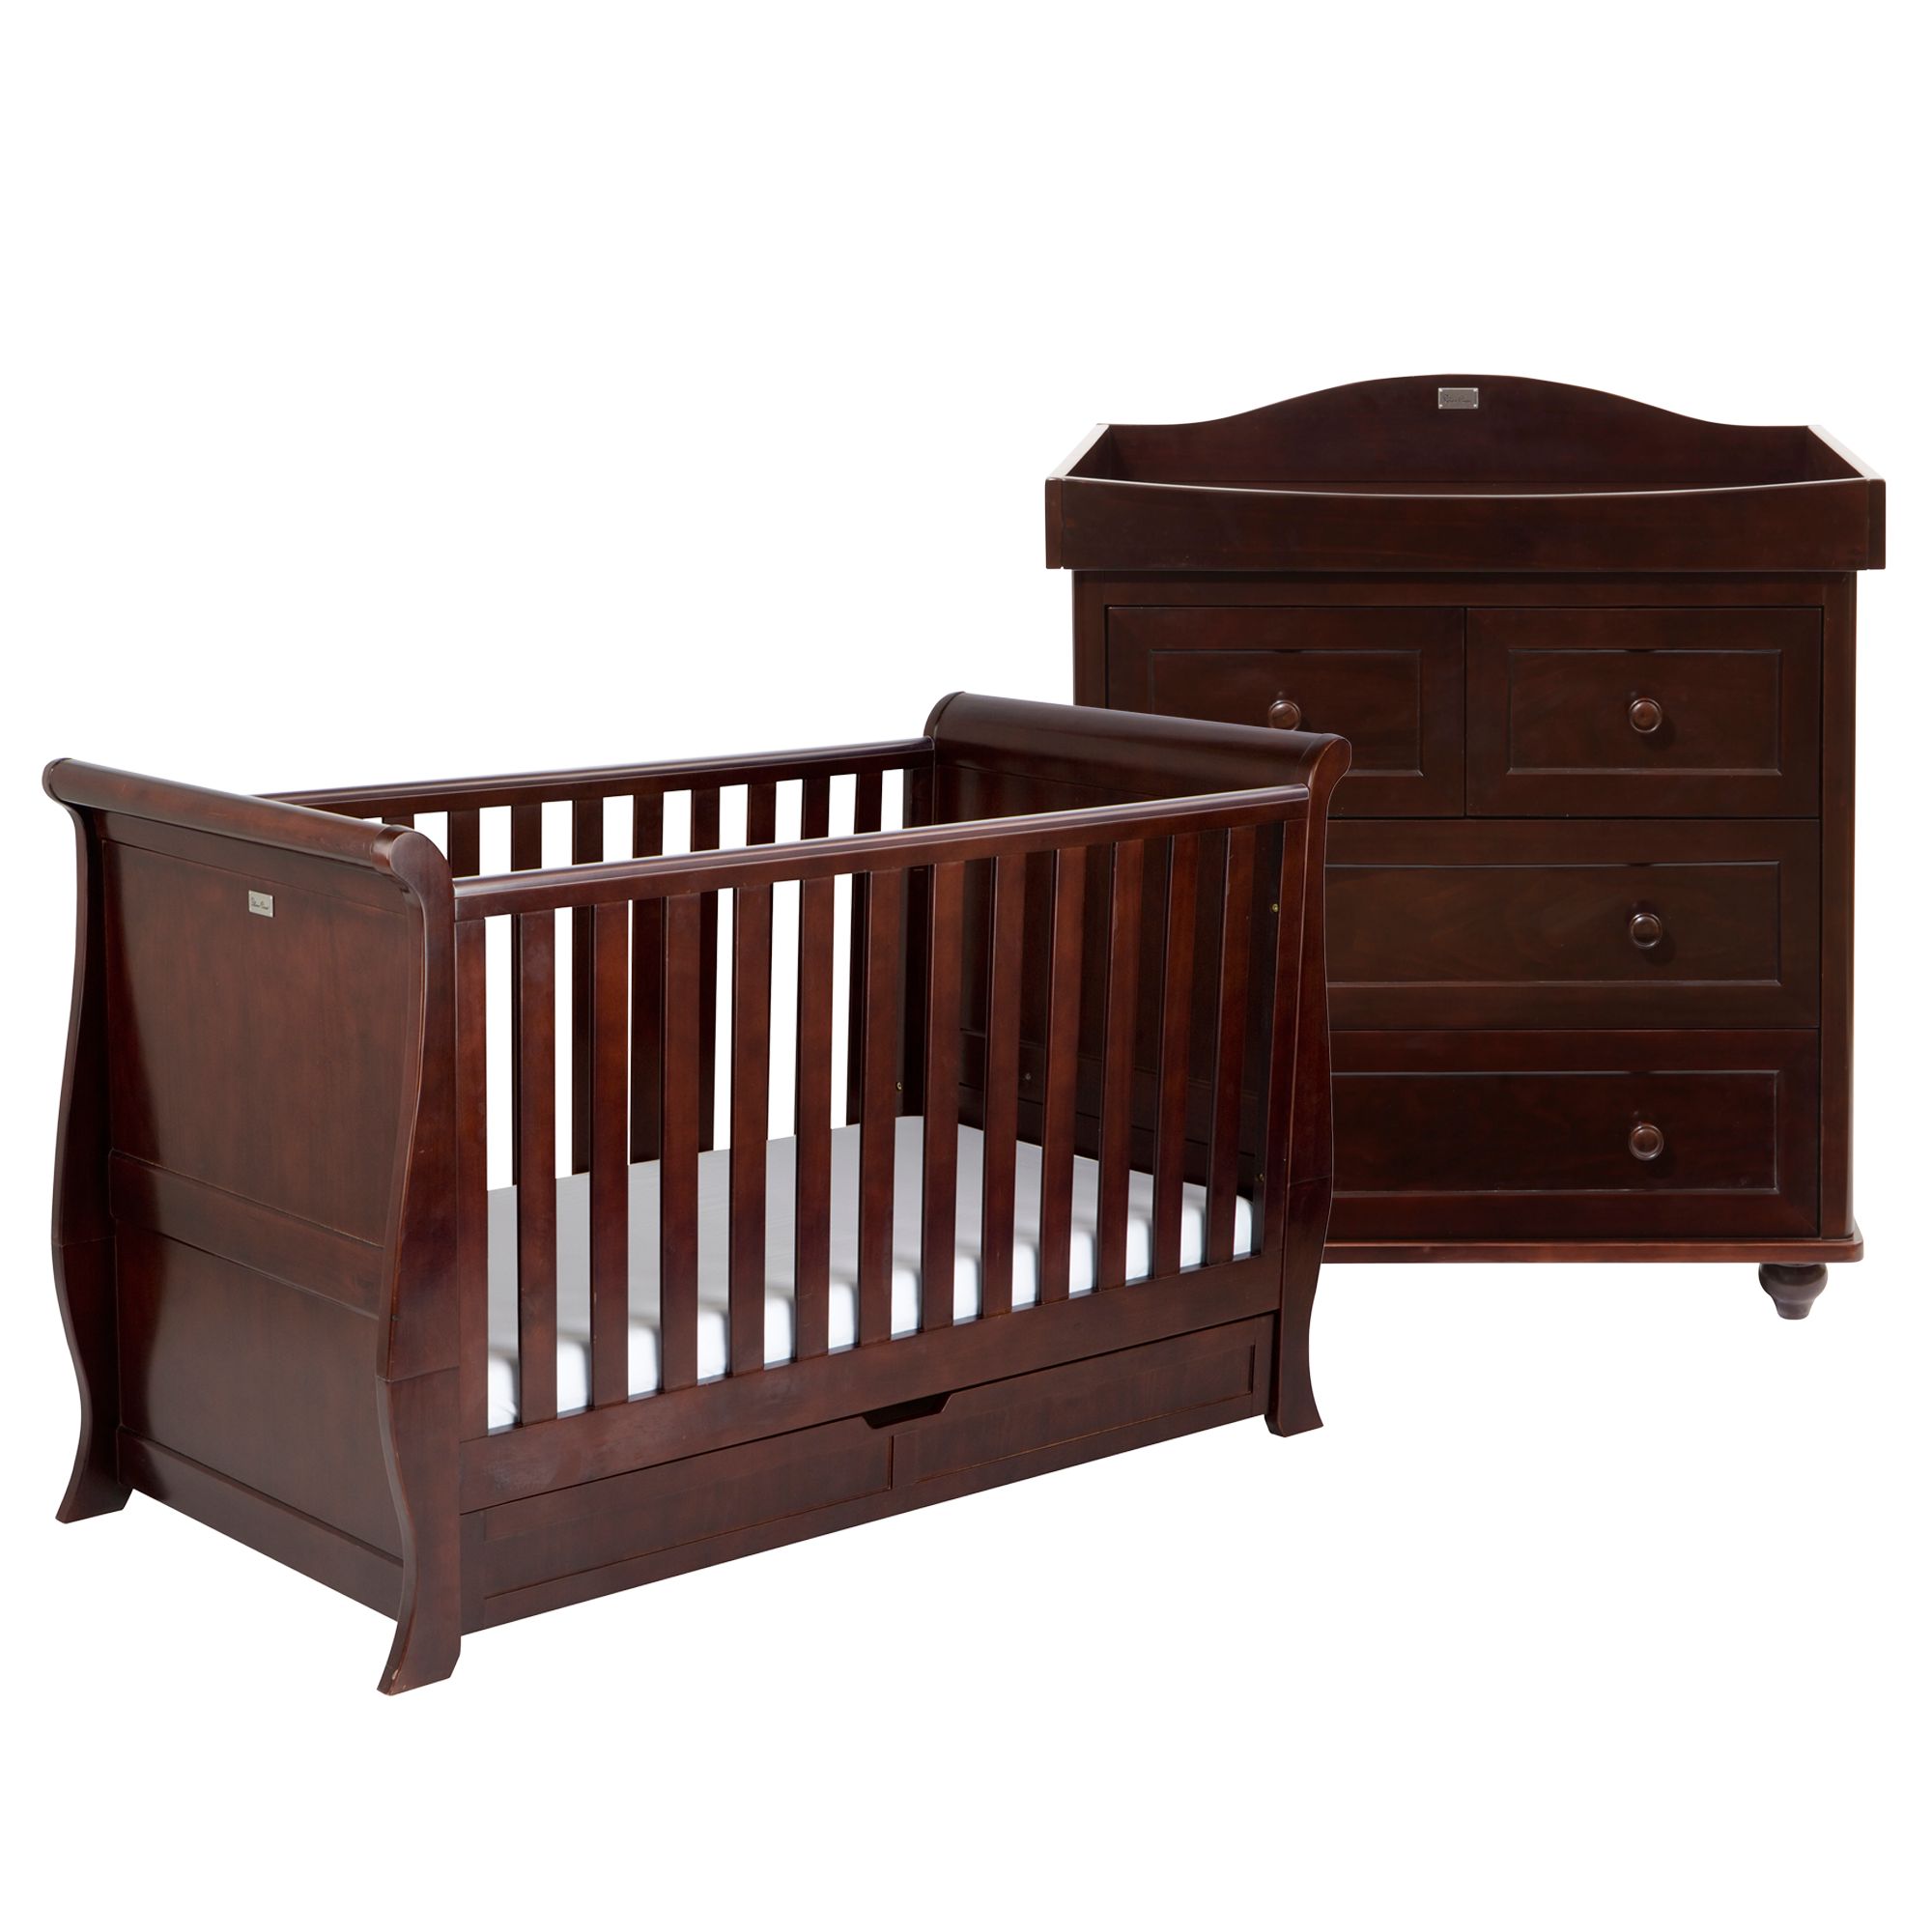 Silver Cross Dorchester Cotbed And Dresser Set Dark Cherry At